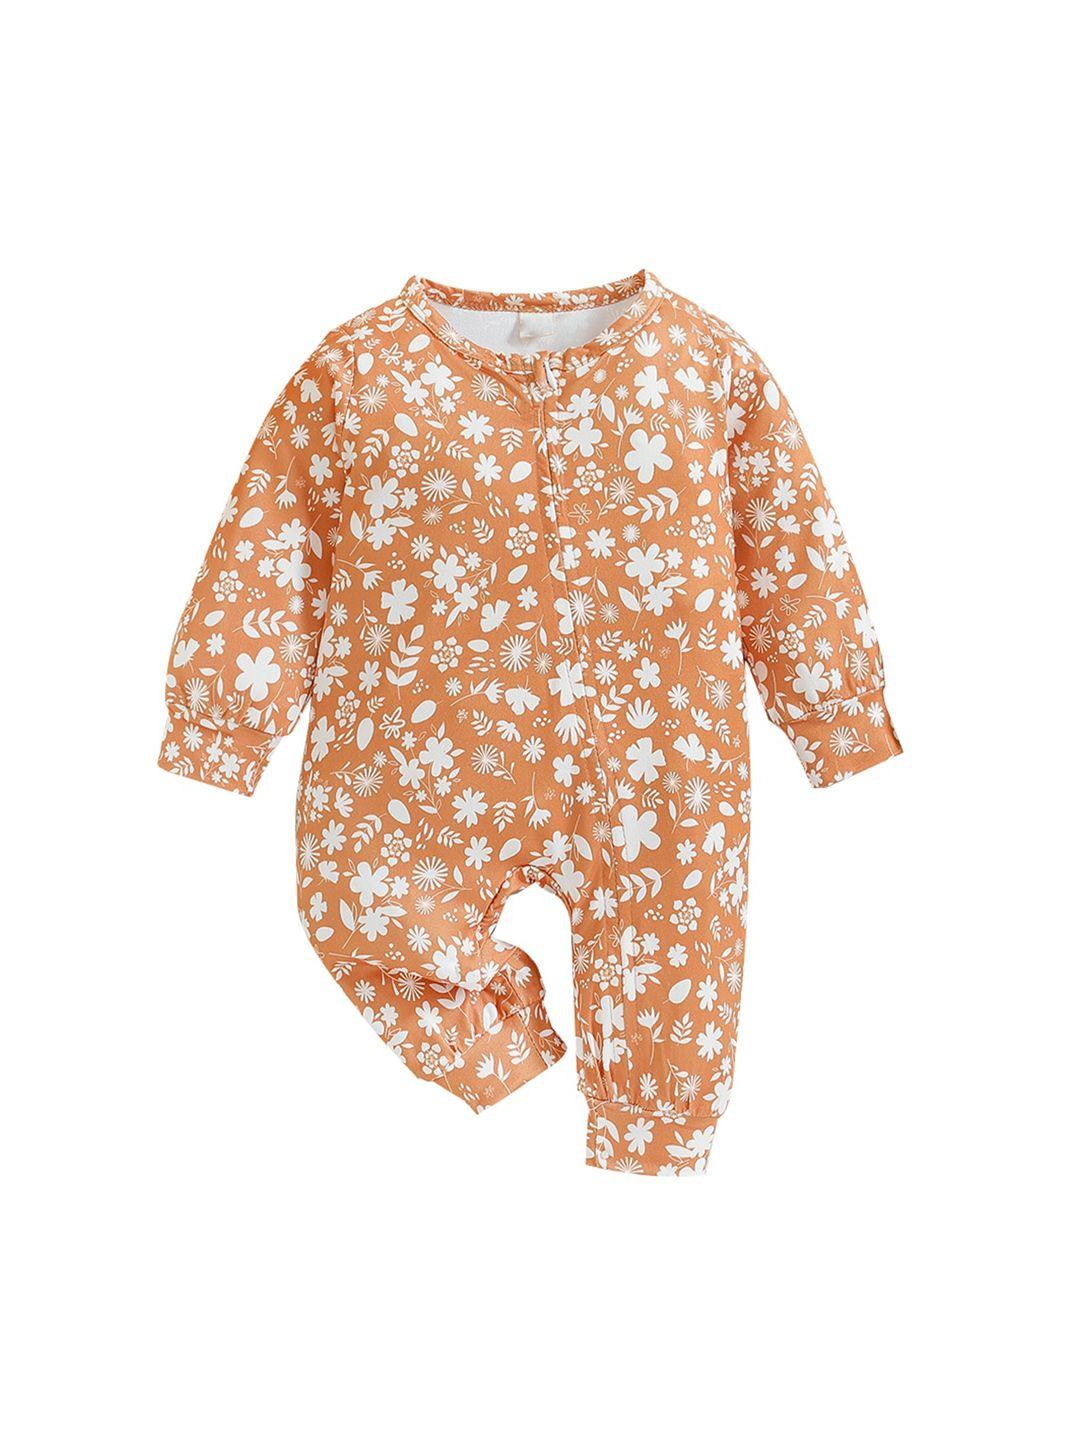 stylecast-girls-floral-printed-cotton-rompers